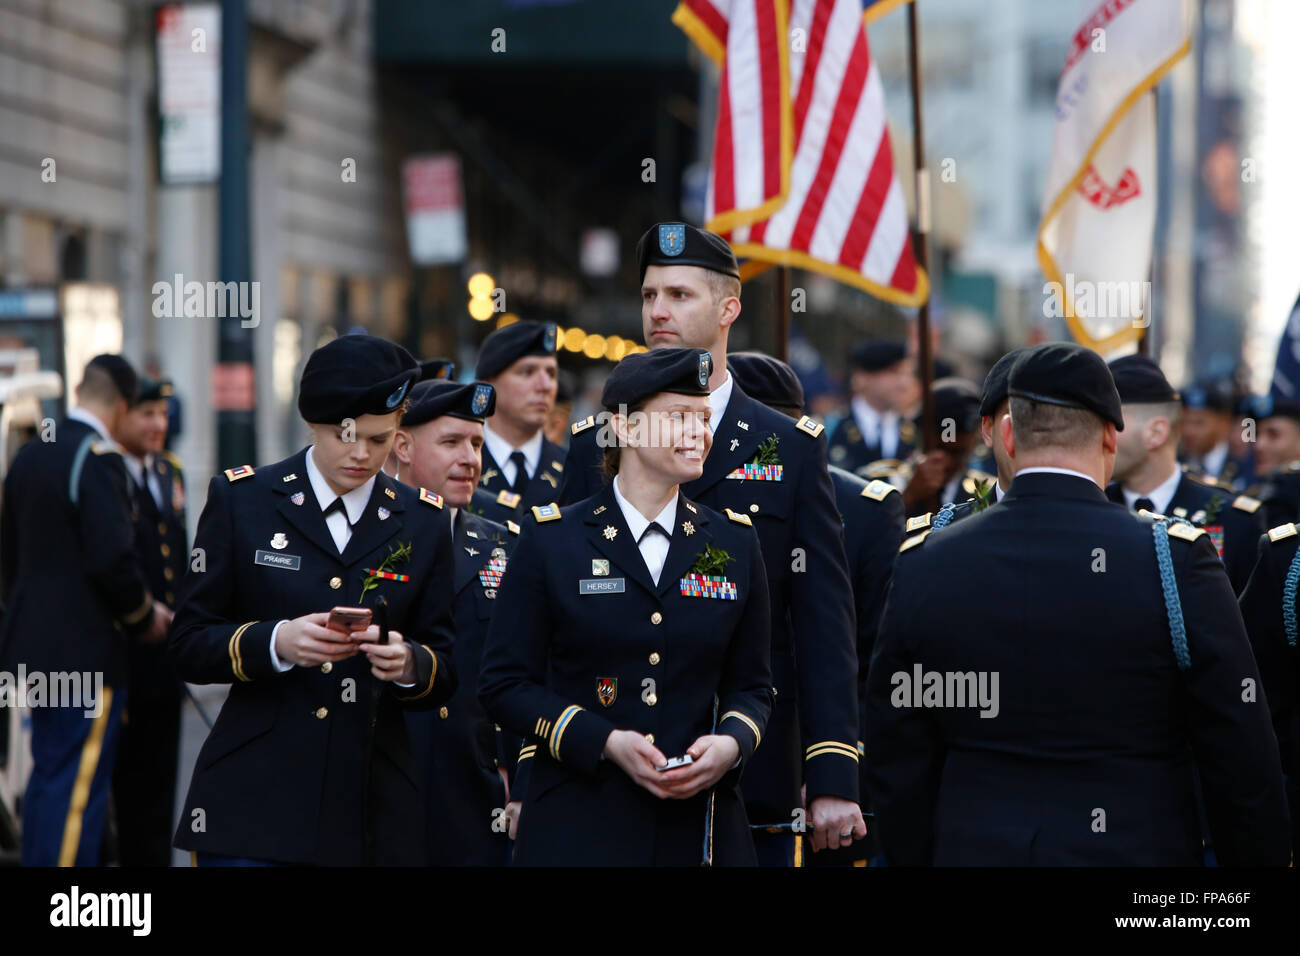 New York City, USA, 17 March 2016. St Patrick's Day parade:  Members of US army honor guard assemble casually prior to marching in St Patrick's Day Parade Credit:  Andrew Katz/Alamy Live News Stock Photo